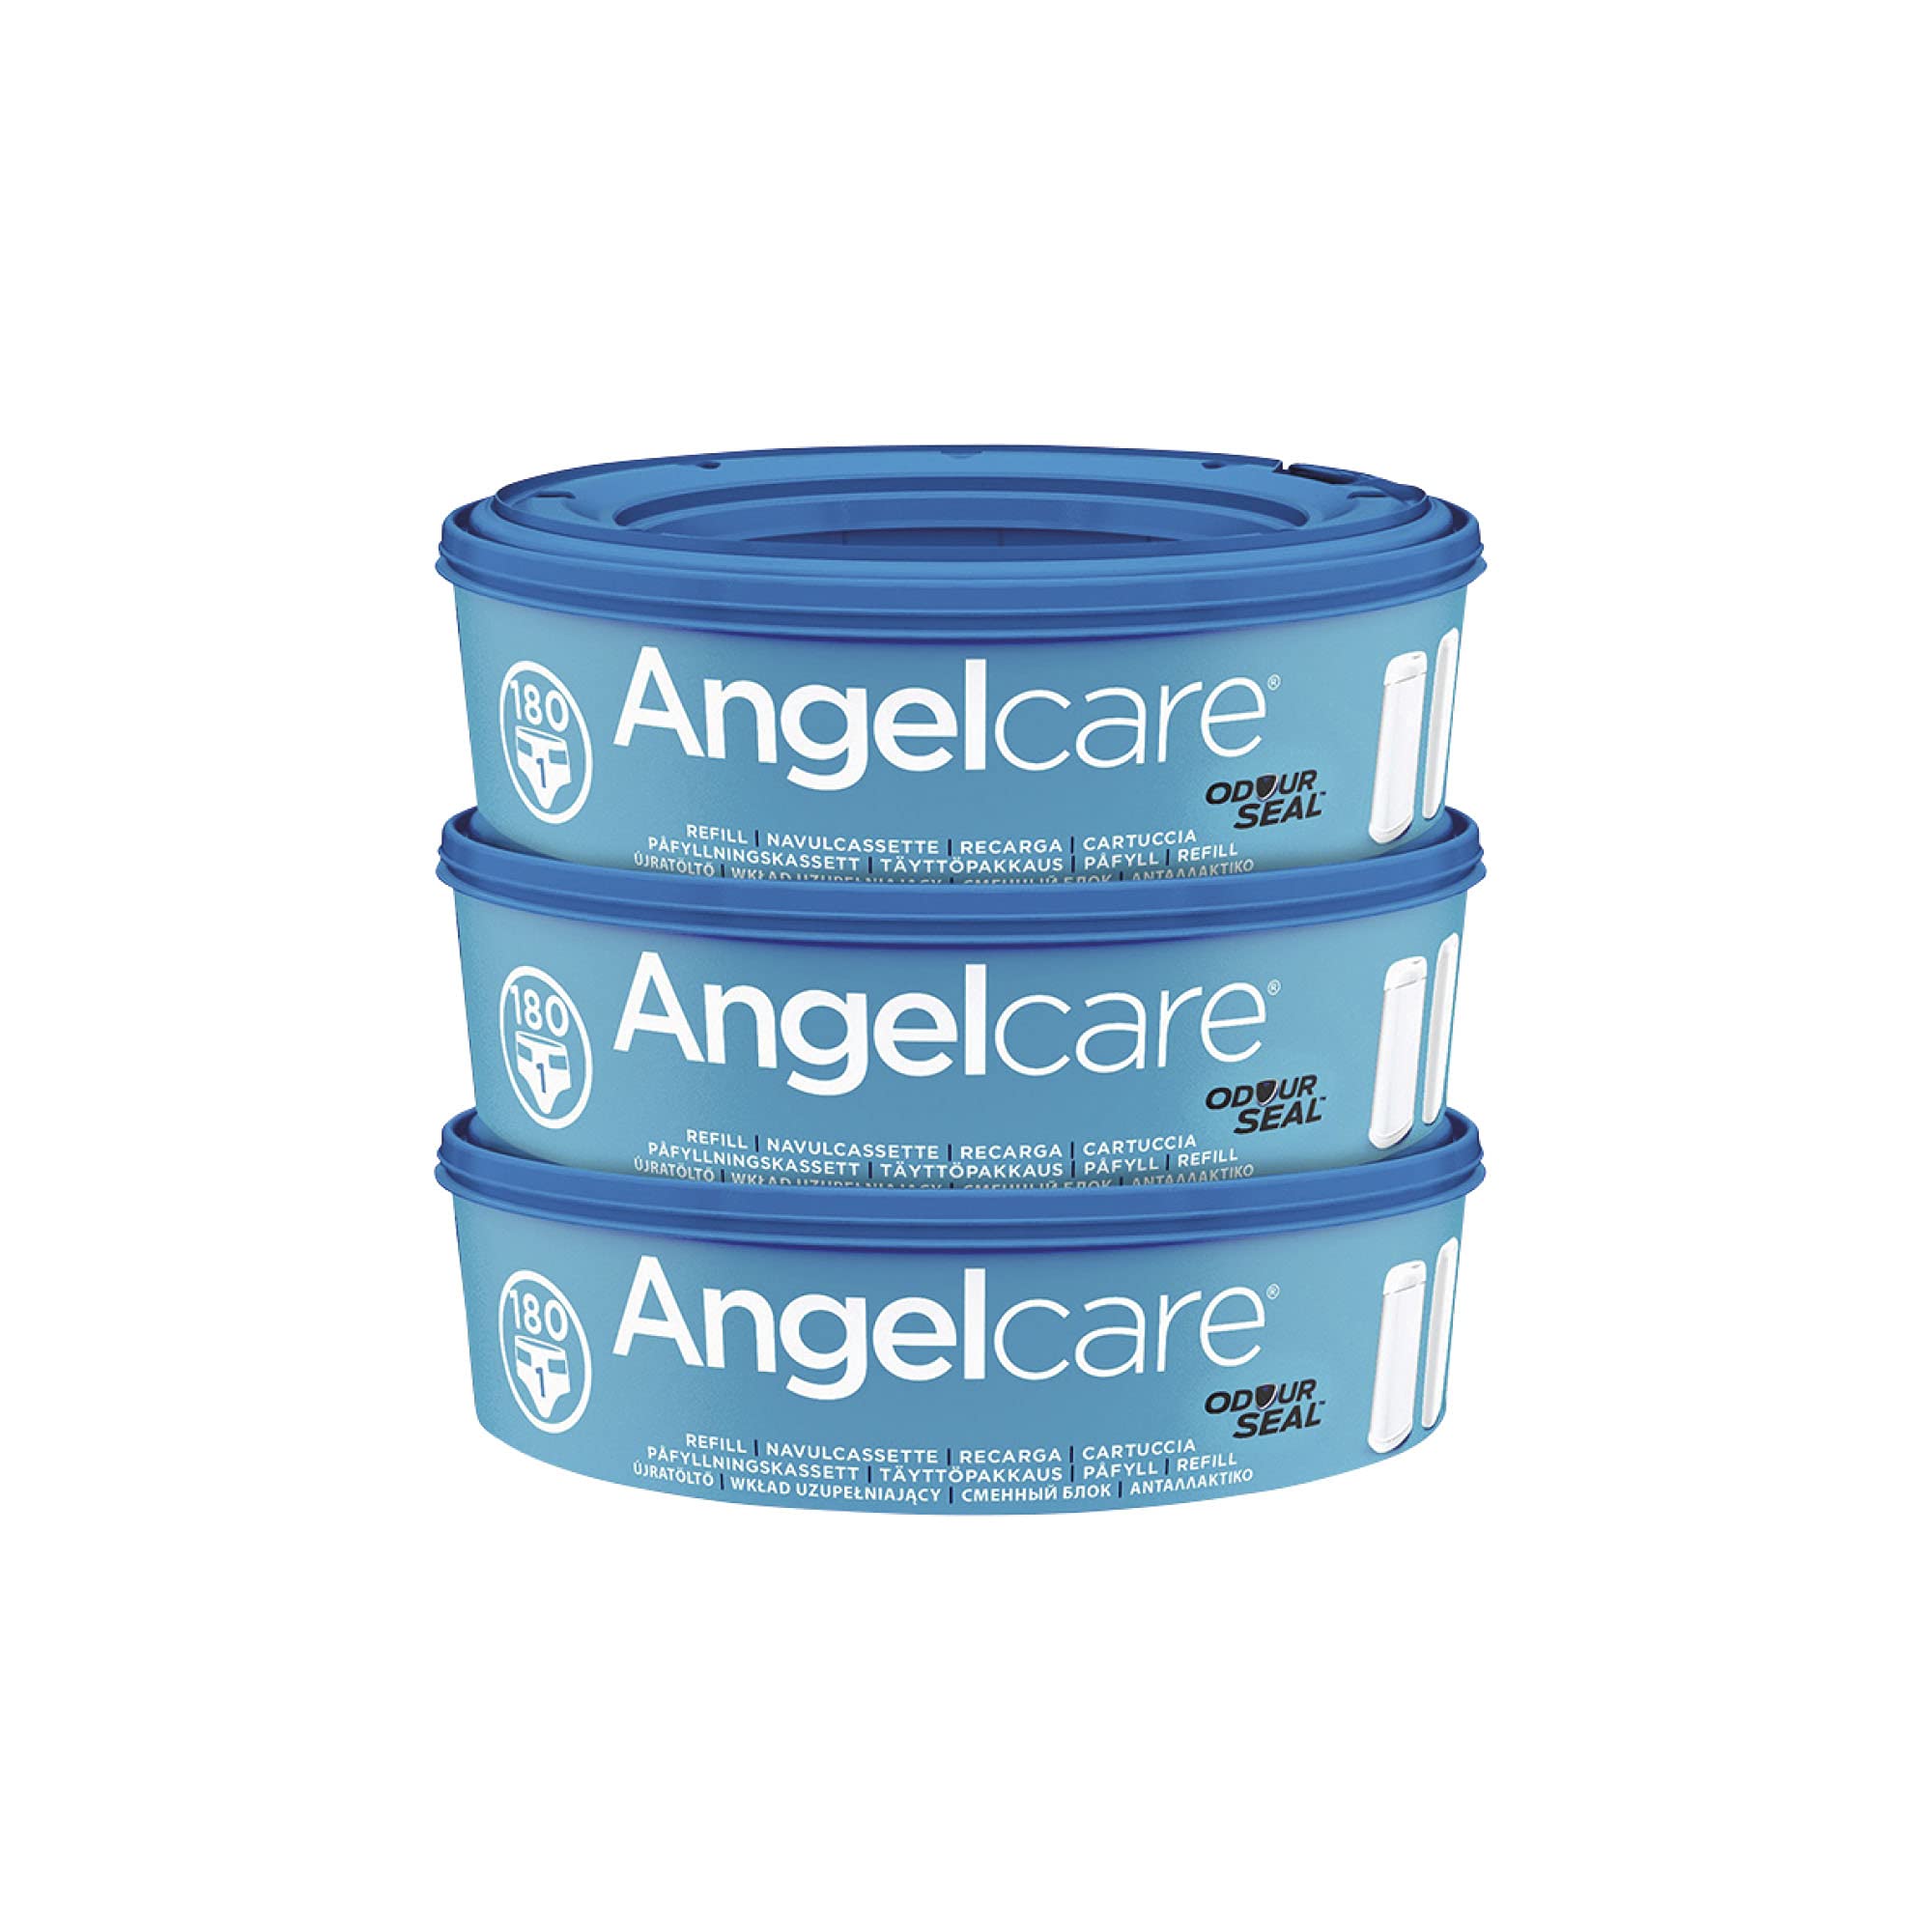 Angelcare Nappy Disposal System Refill Cassettes - Pack of 3